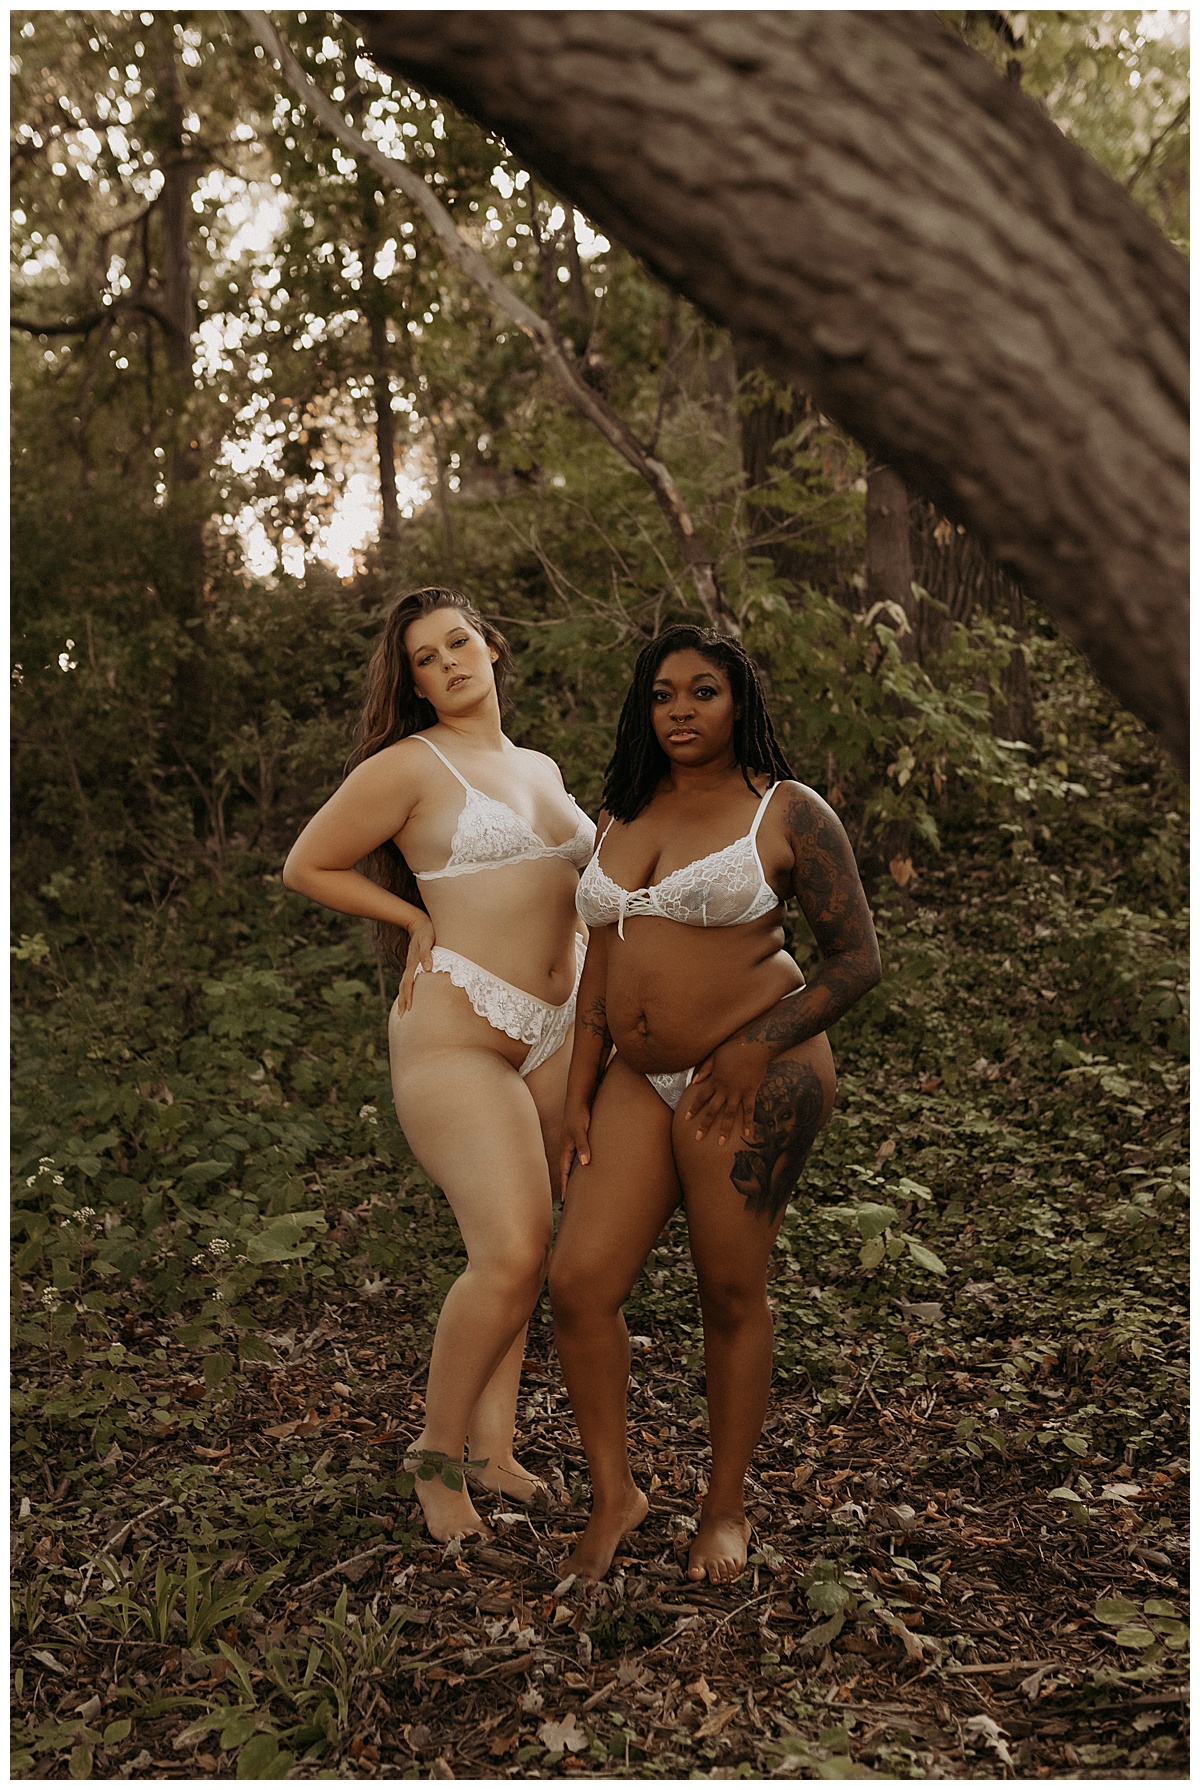 Two women stand together in white lingerie for Minneapolis Boudoir Photographer